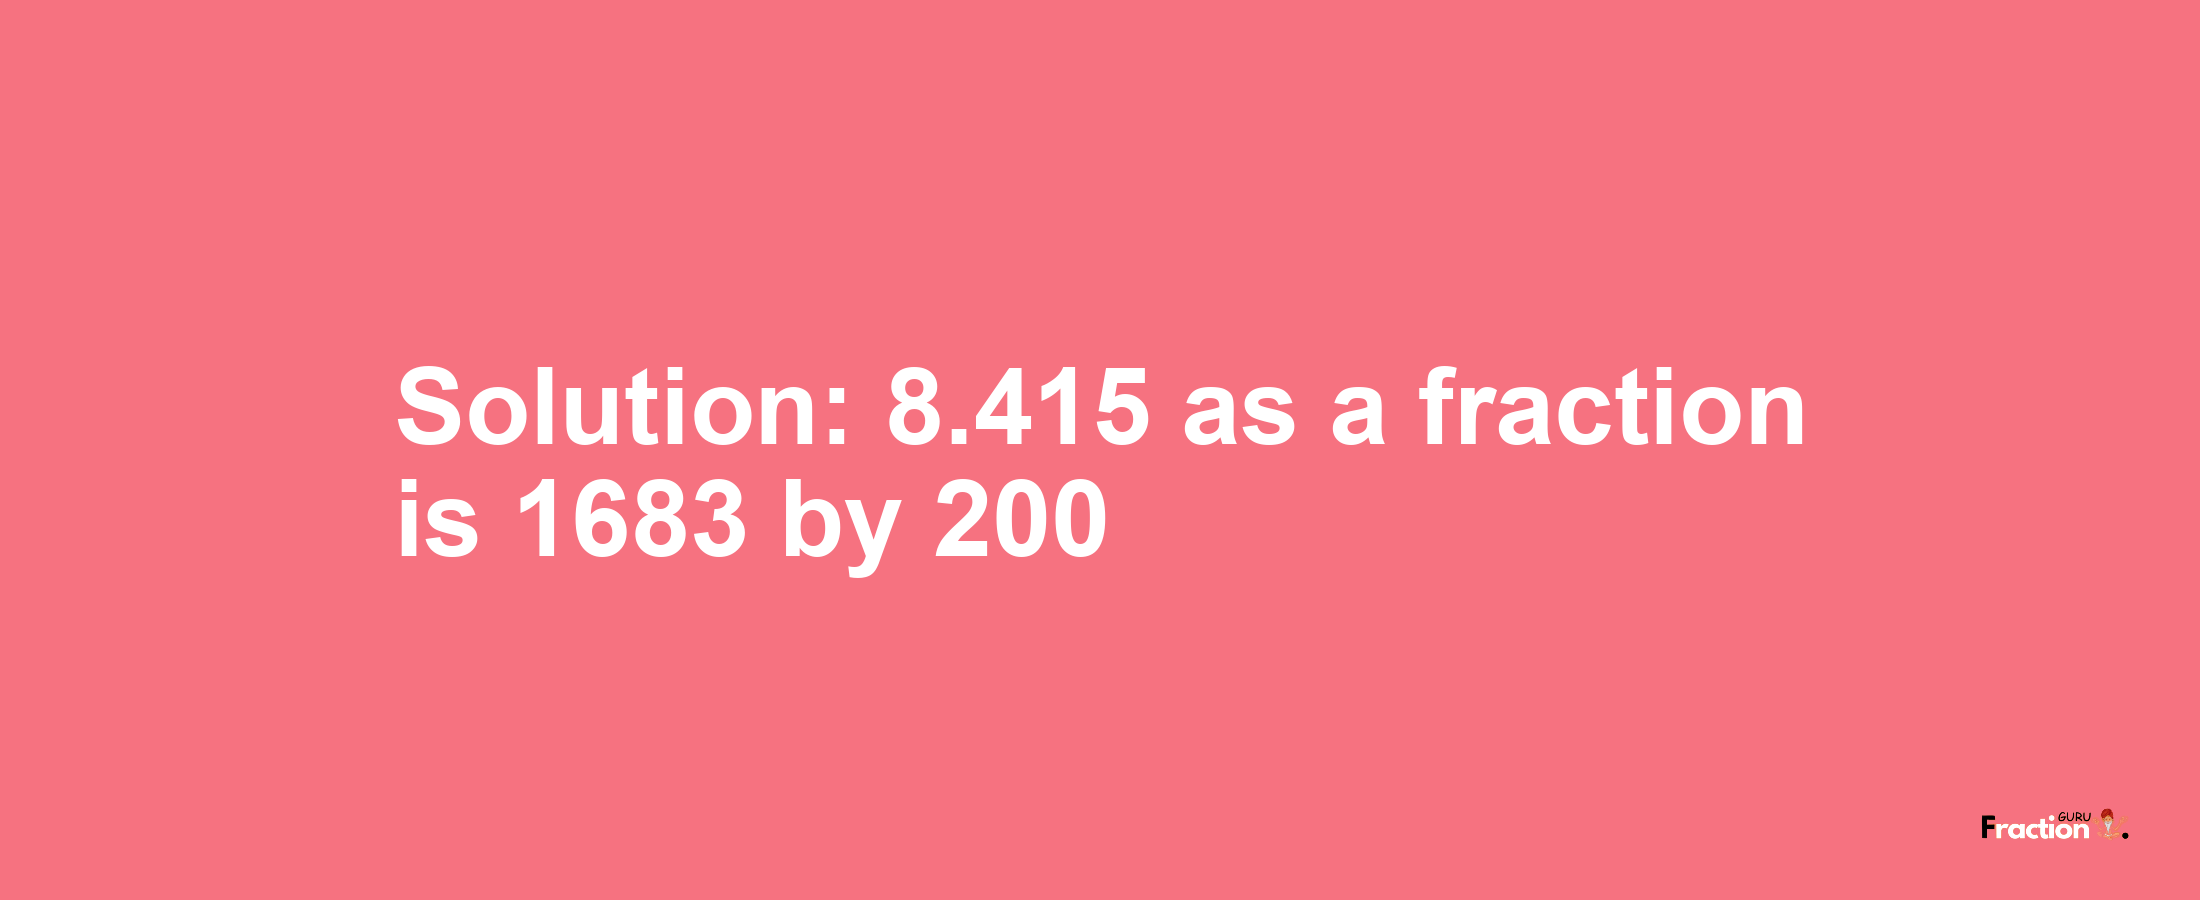 Solution:8.415 as a fraction is 1683/200